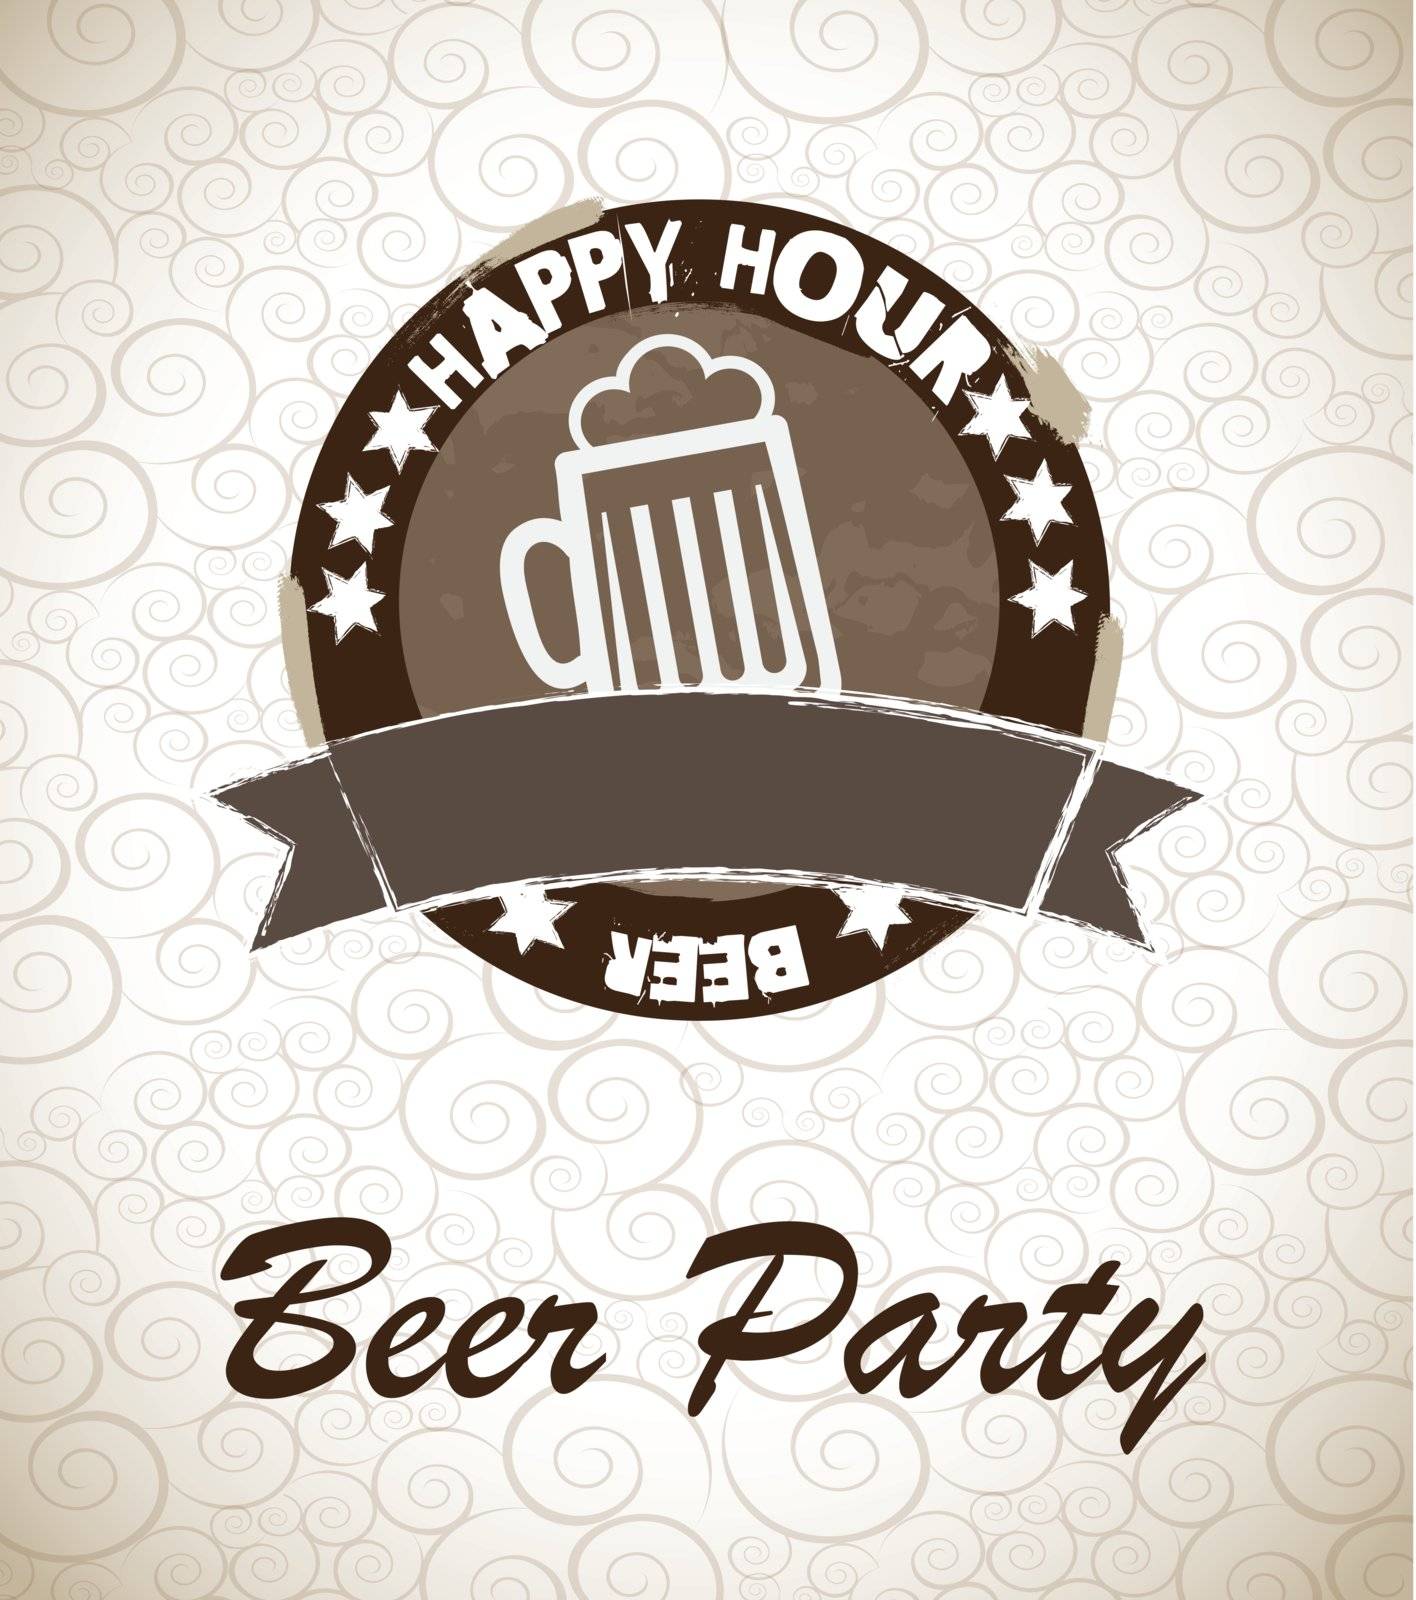 a big glass of beer in signal of happy hour vector illustration